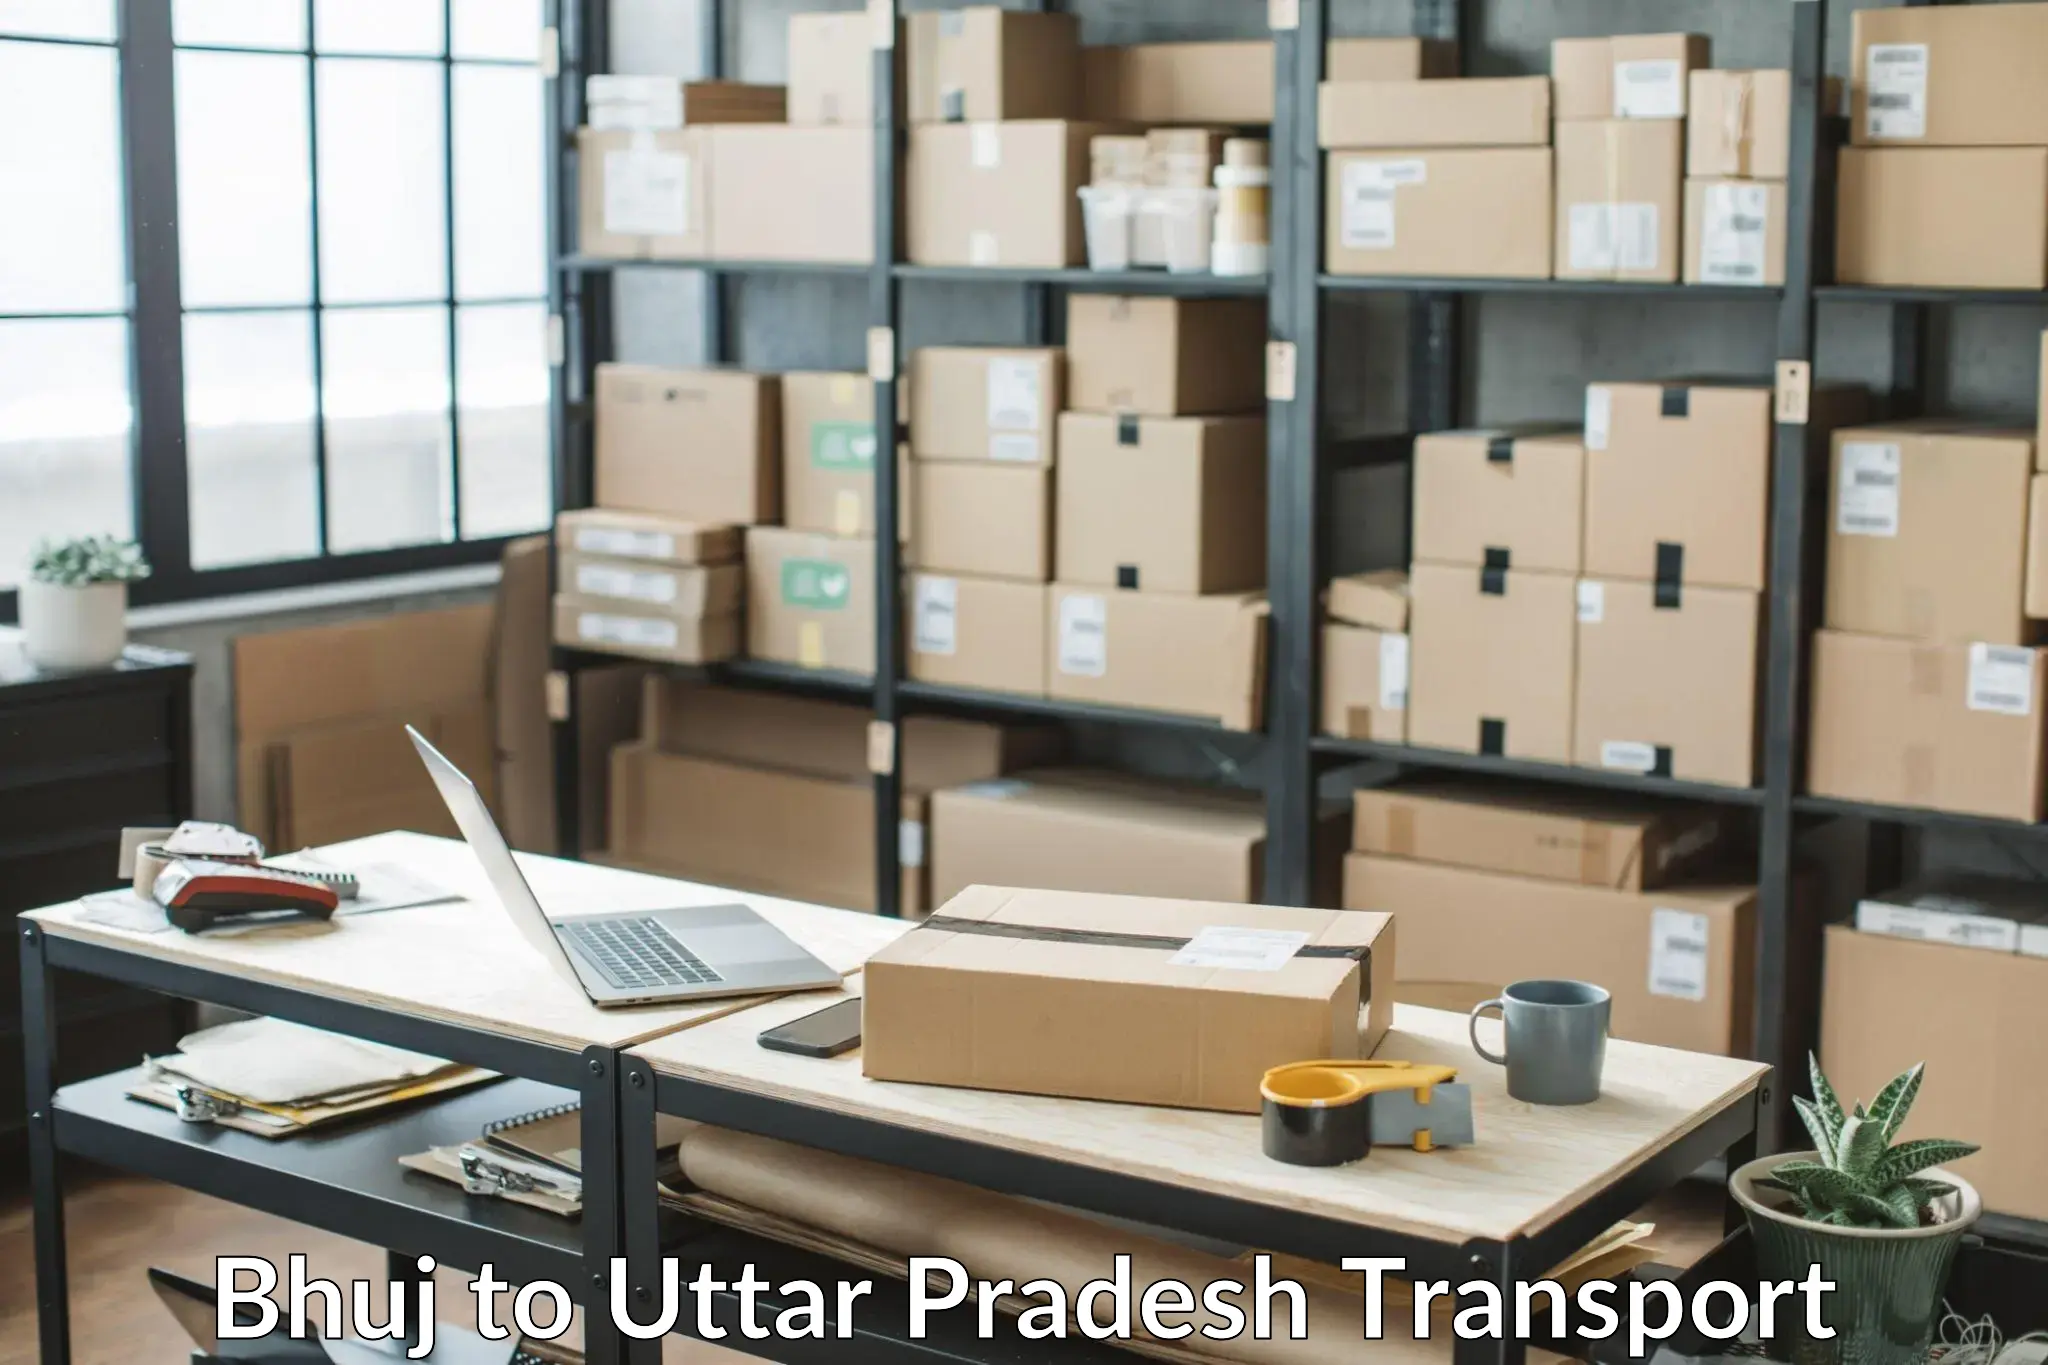 Truck transport companies in India Bhuj to Jalesar